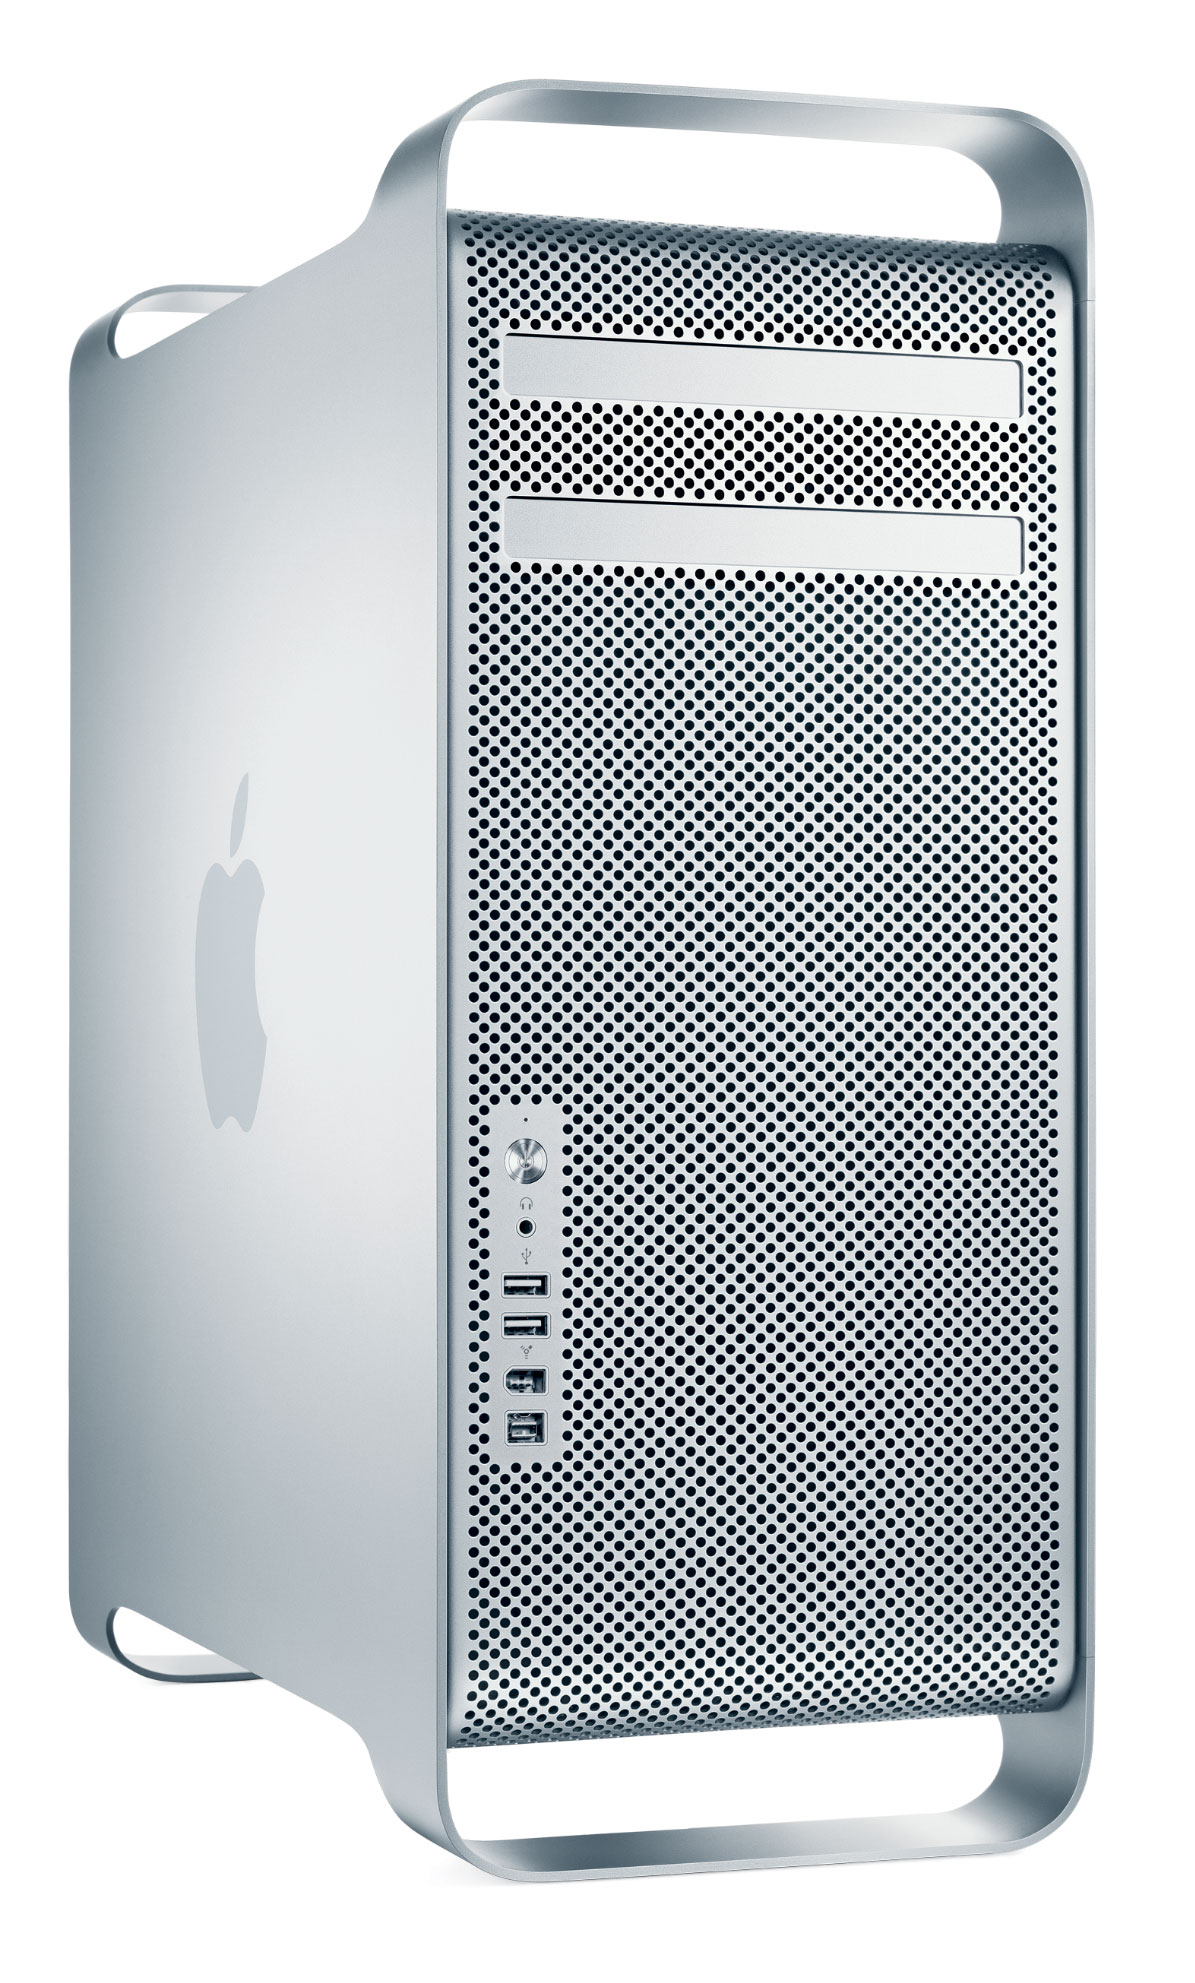 Mac Pro Cases and Parts - 2012